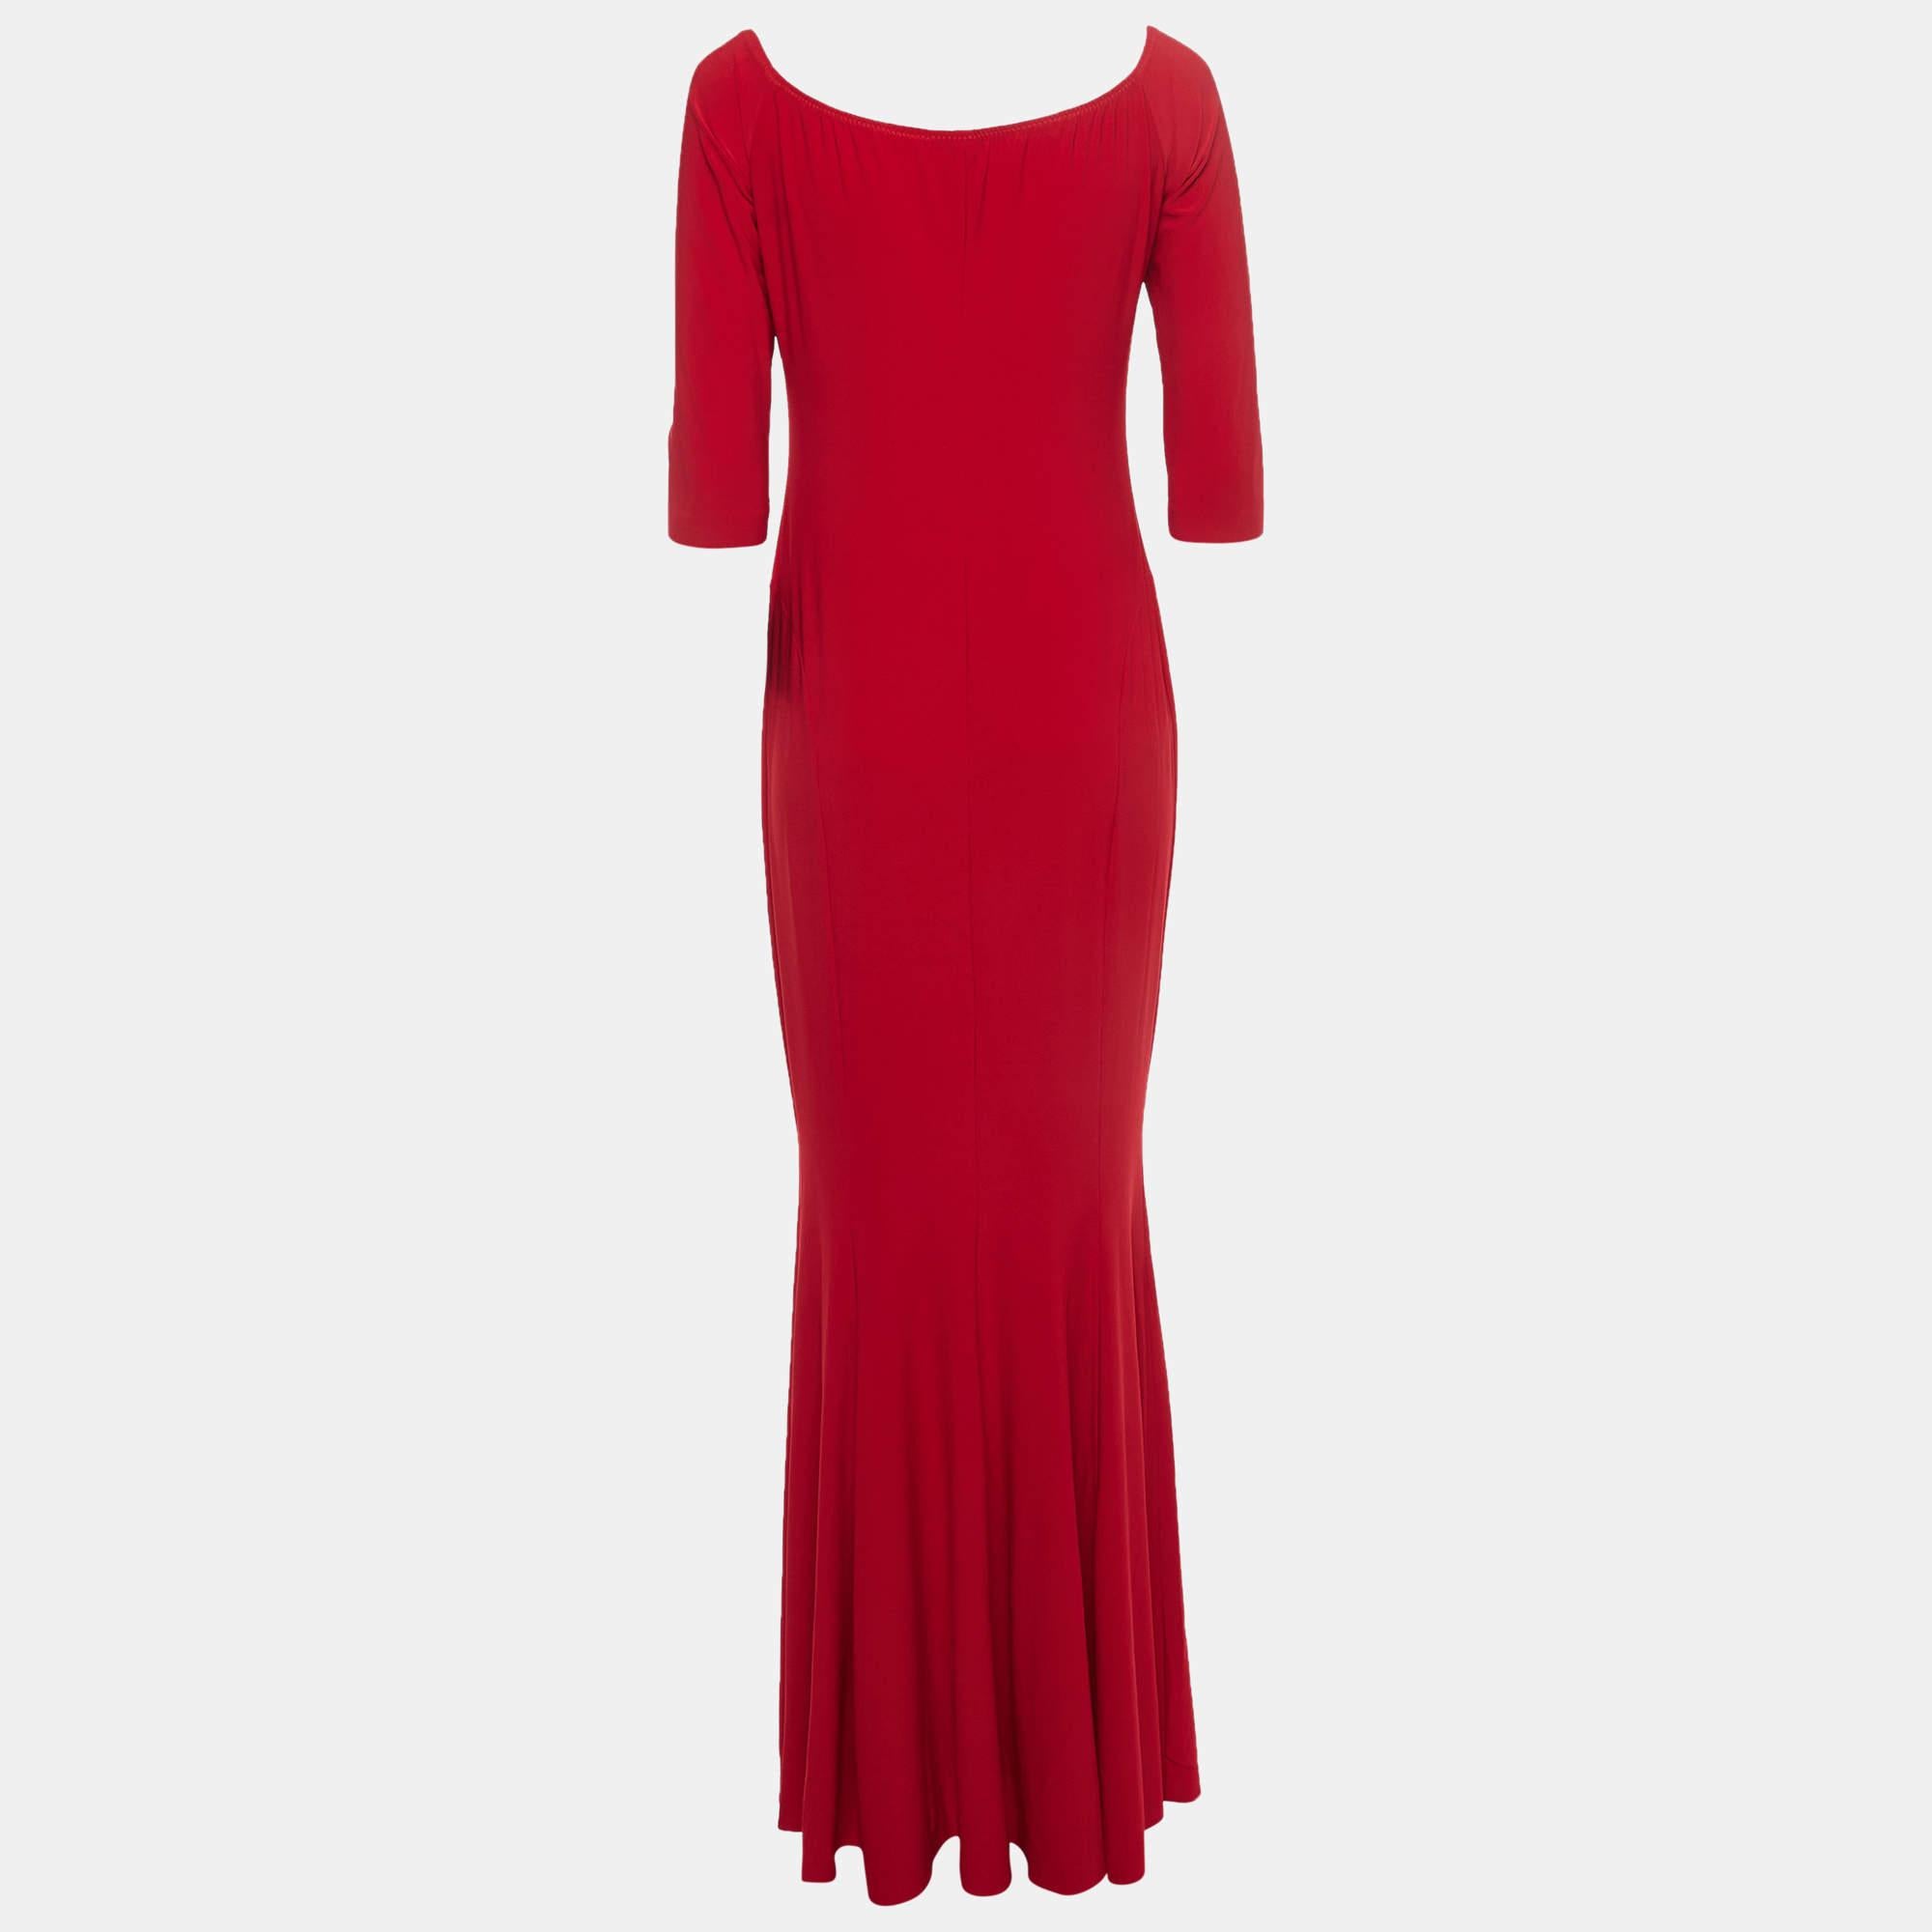 For all evening soirées and high-affair parties, a gown like this makes sure you look the best of all. Tailored into a superb fit and style, this gown is elevated with a stunning neckline and a beautiful hue. Bring home this lovely gown